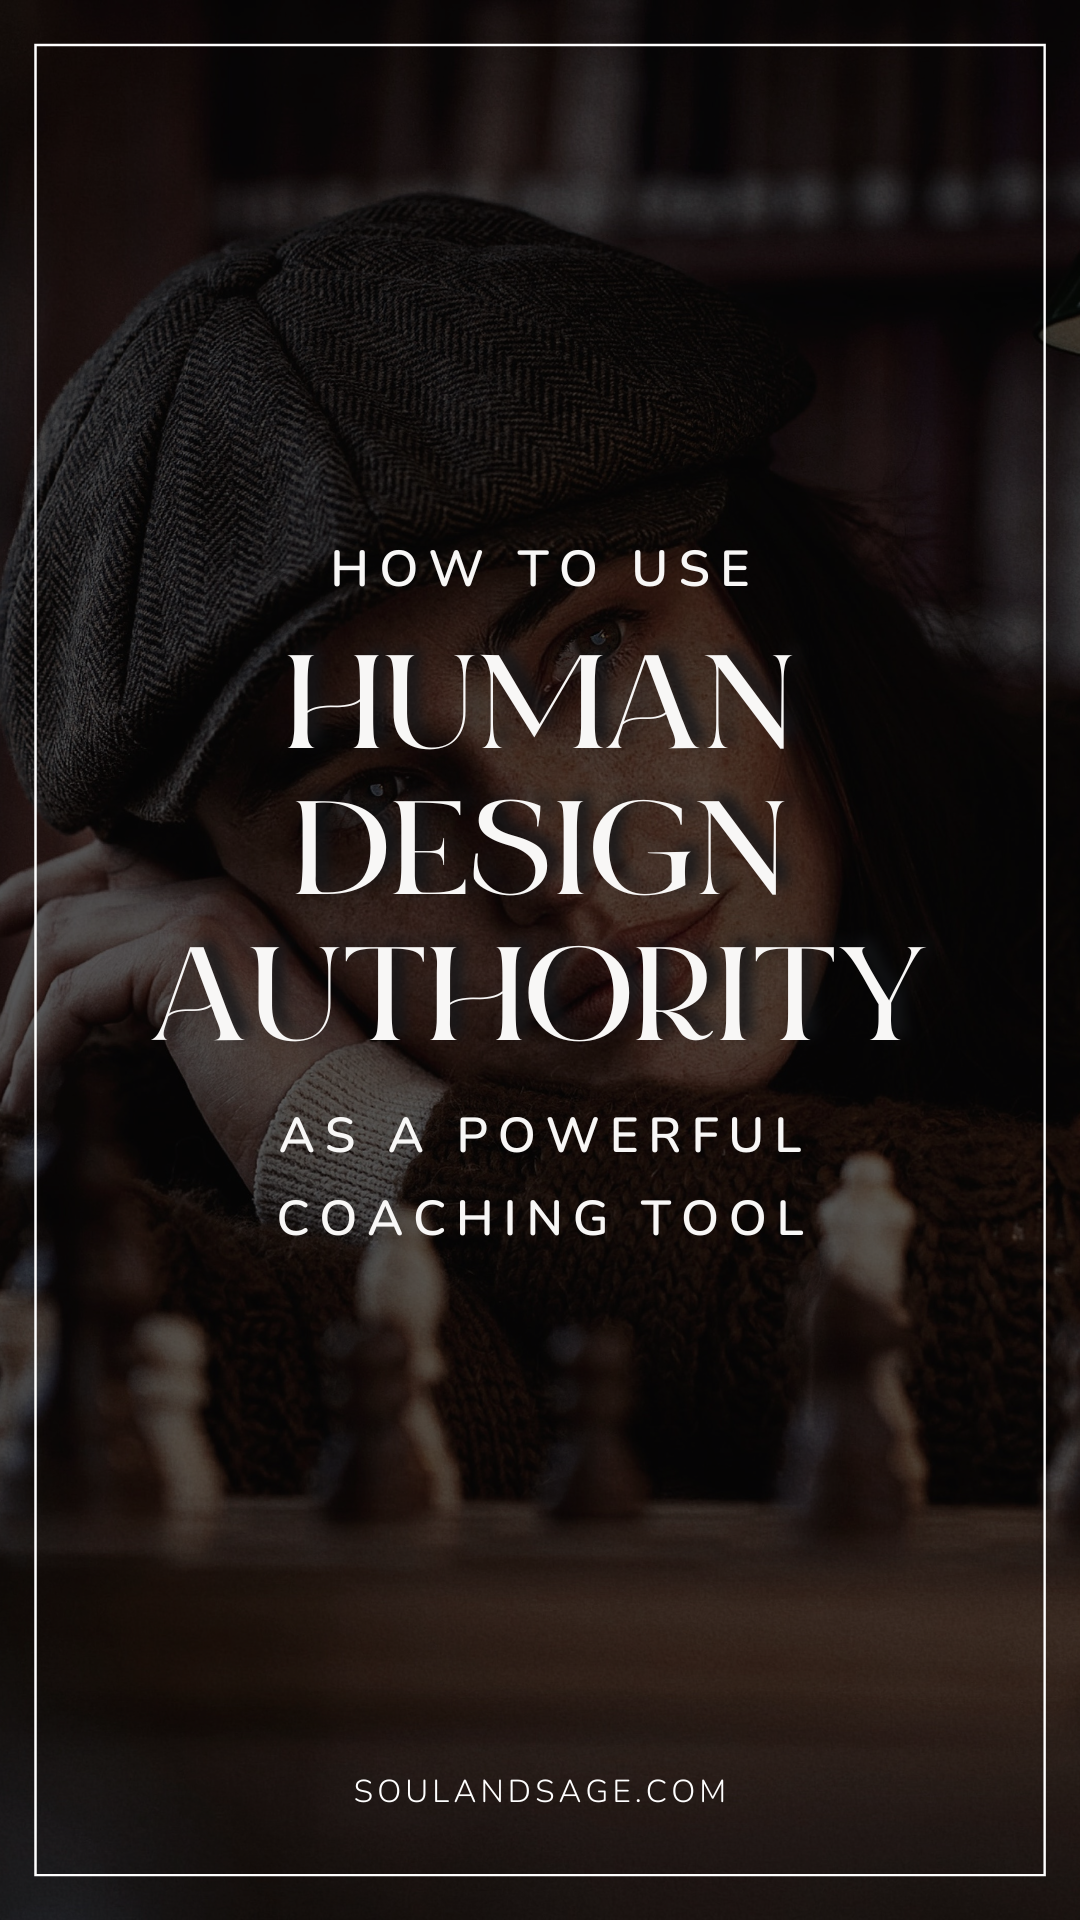 How to use Human Design Authority as a coaching tool to elevate your skills and impact as a coach